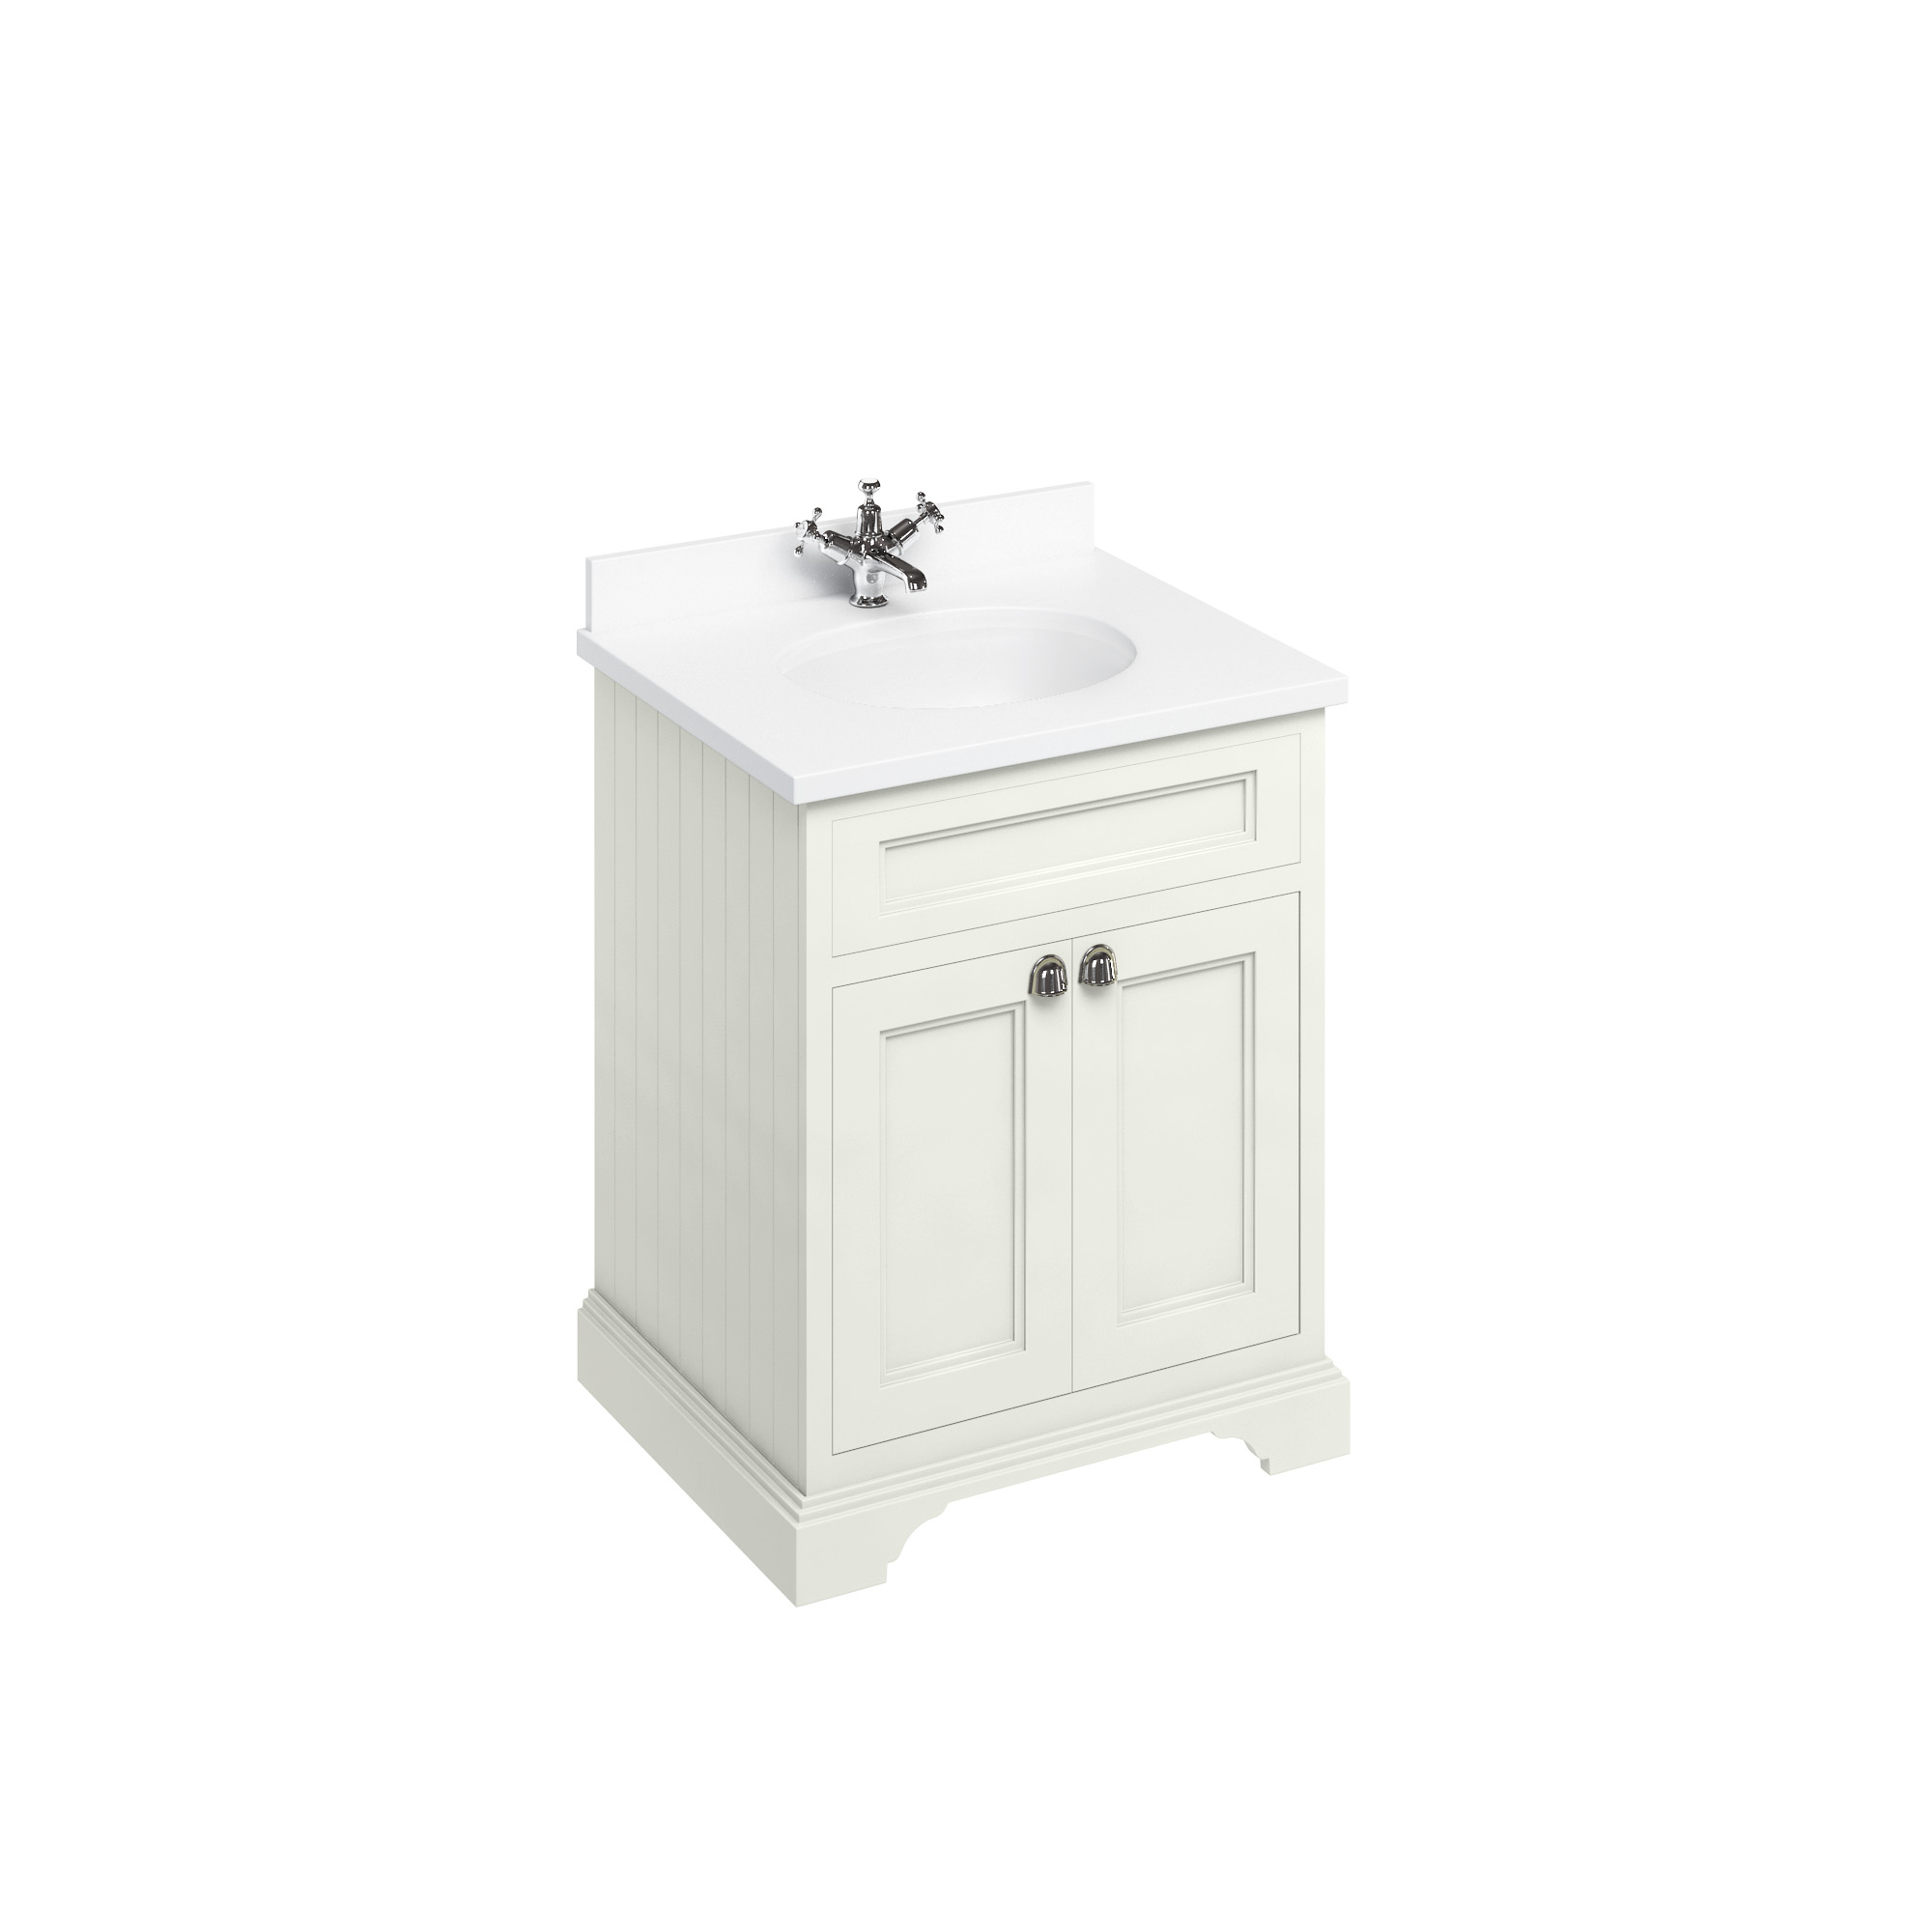 Freestanding 65 Vanity Unit with doors - Sand and Minerva white worktop with integrated white basin